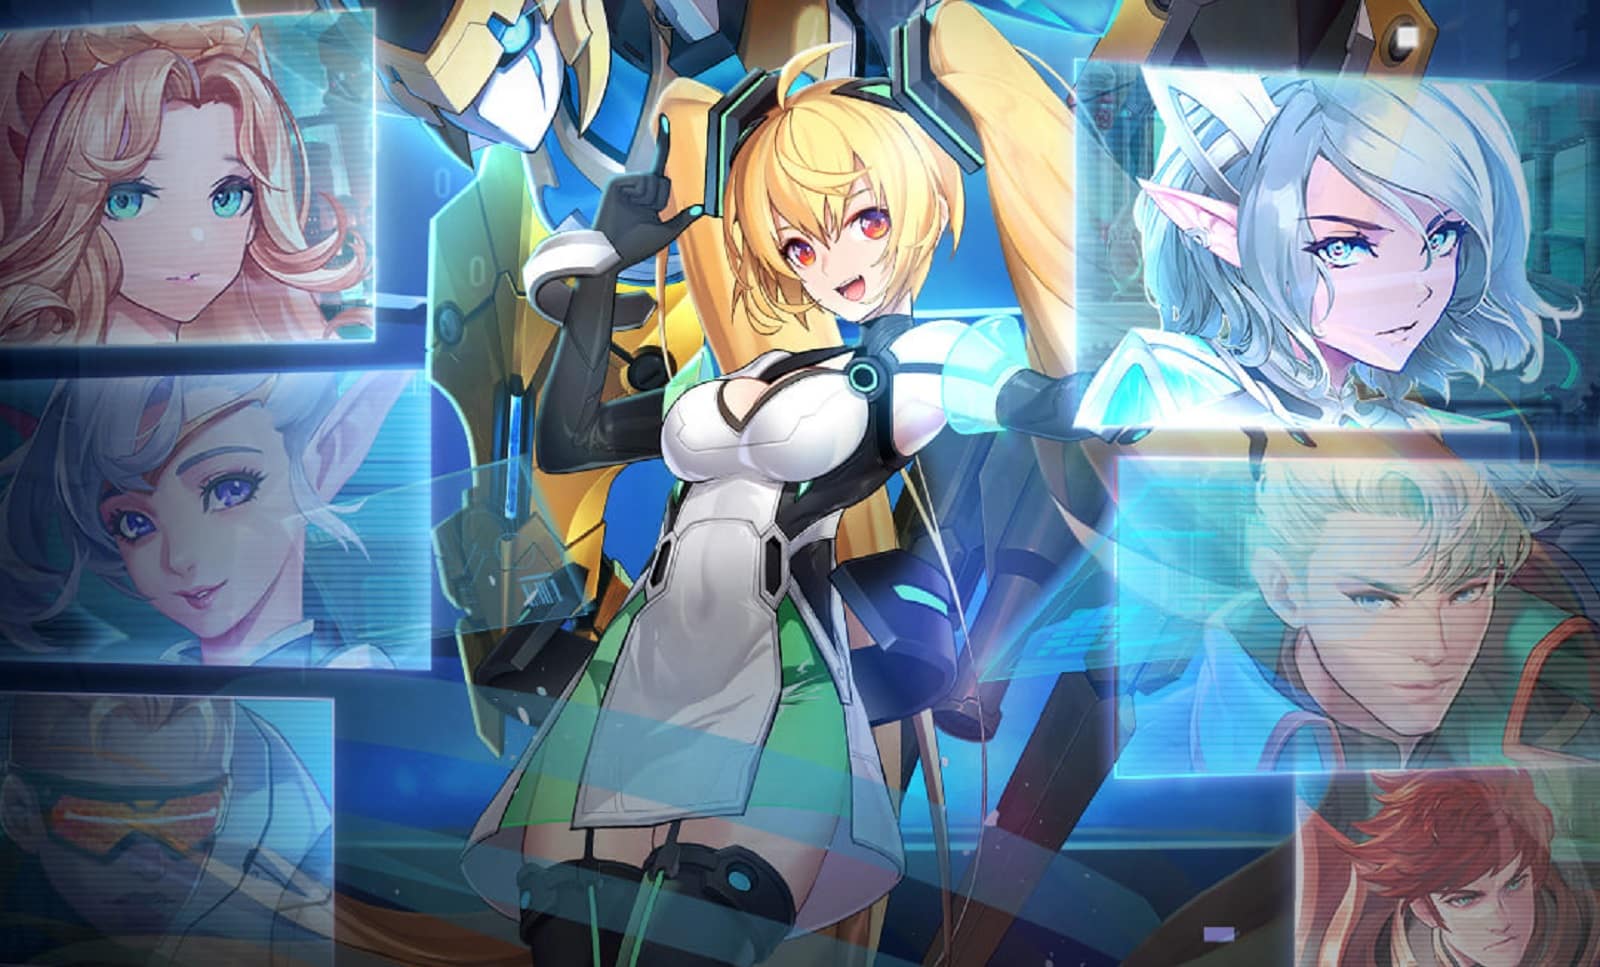 art featuring mecha layla from mobile legends adventure